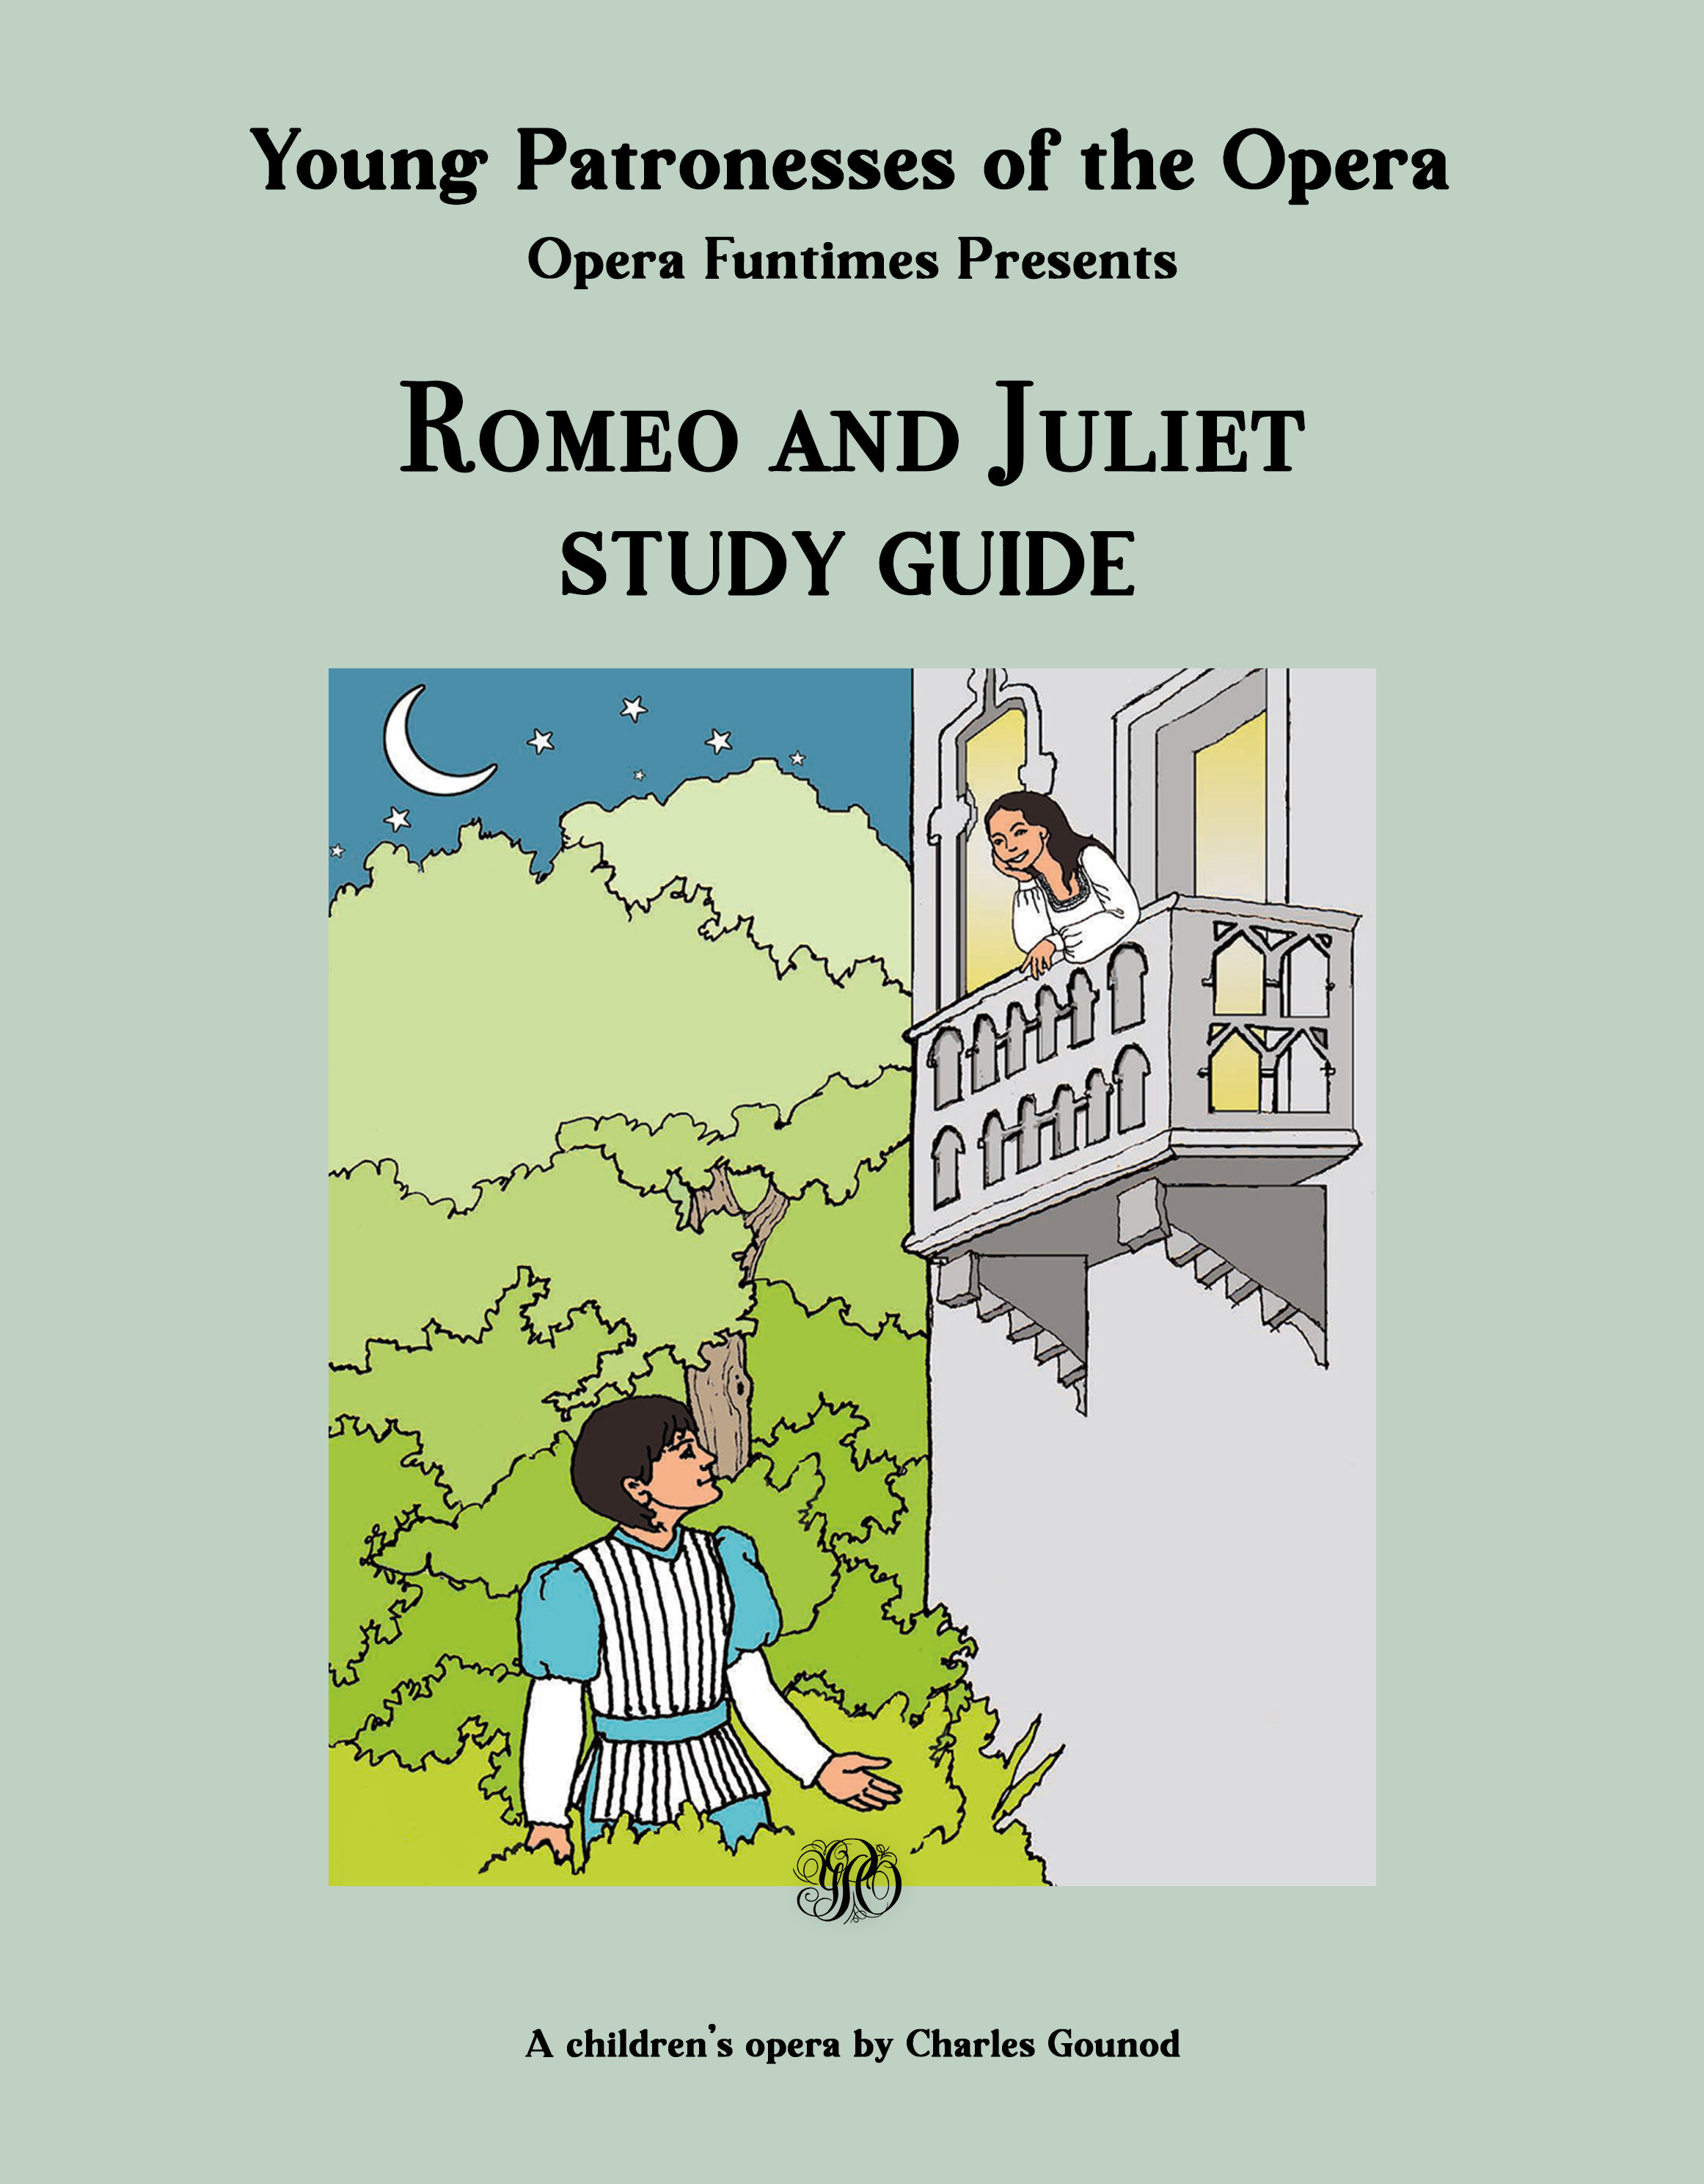 Romeo and Juliet_Opera Funtimes Study Guide Cover.jpg